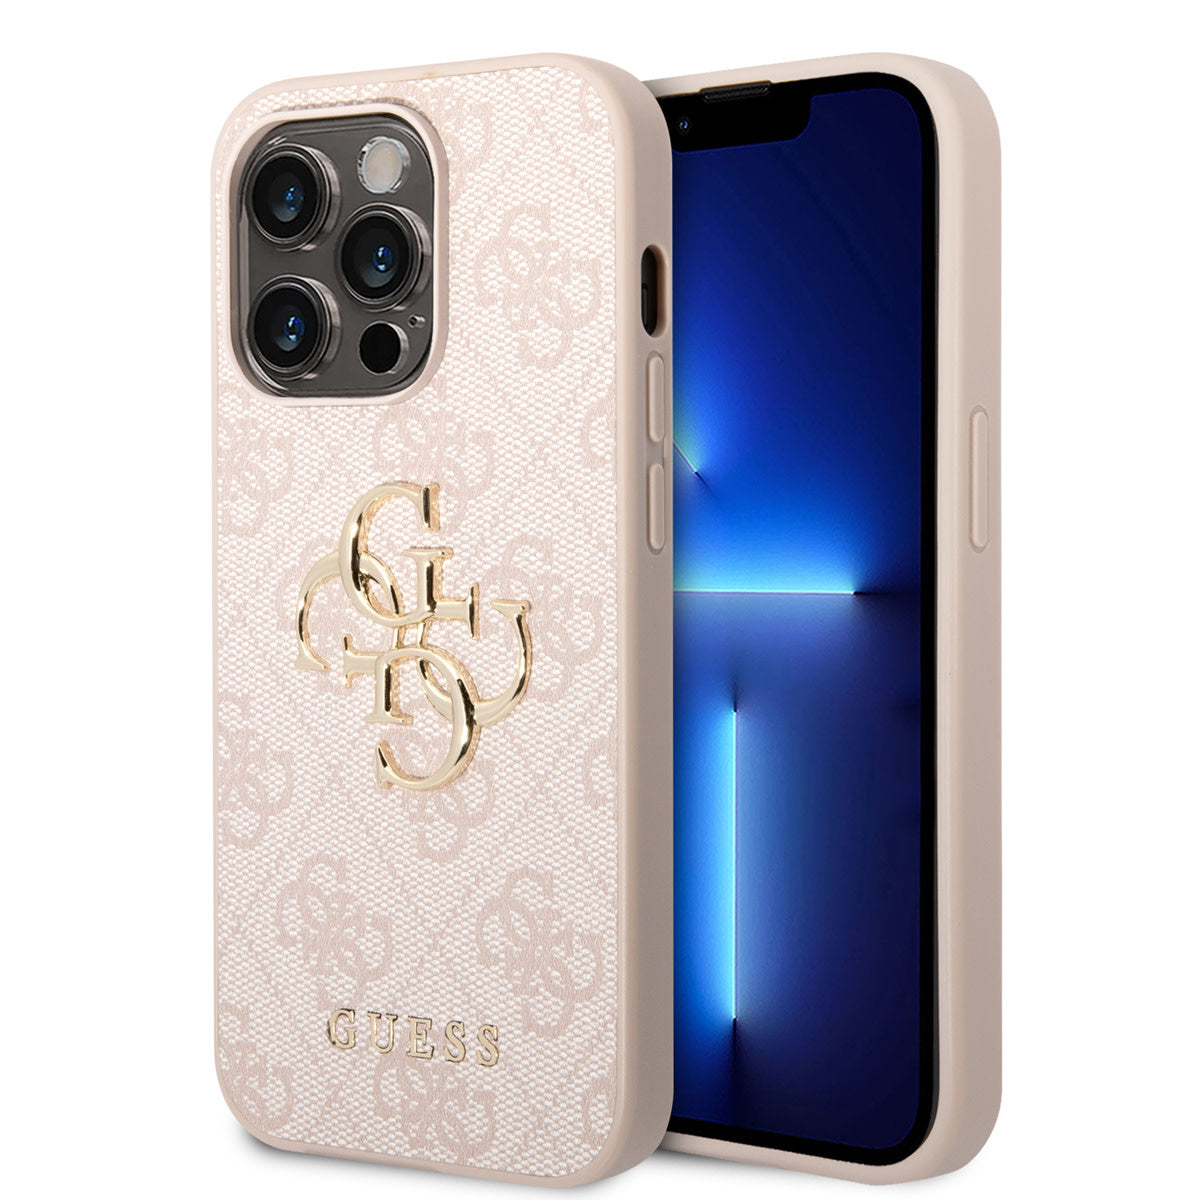 Guess iPhone 14 Pro Max Backcover - Gold 4G Logo - Roze